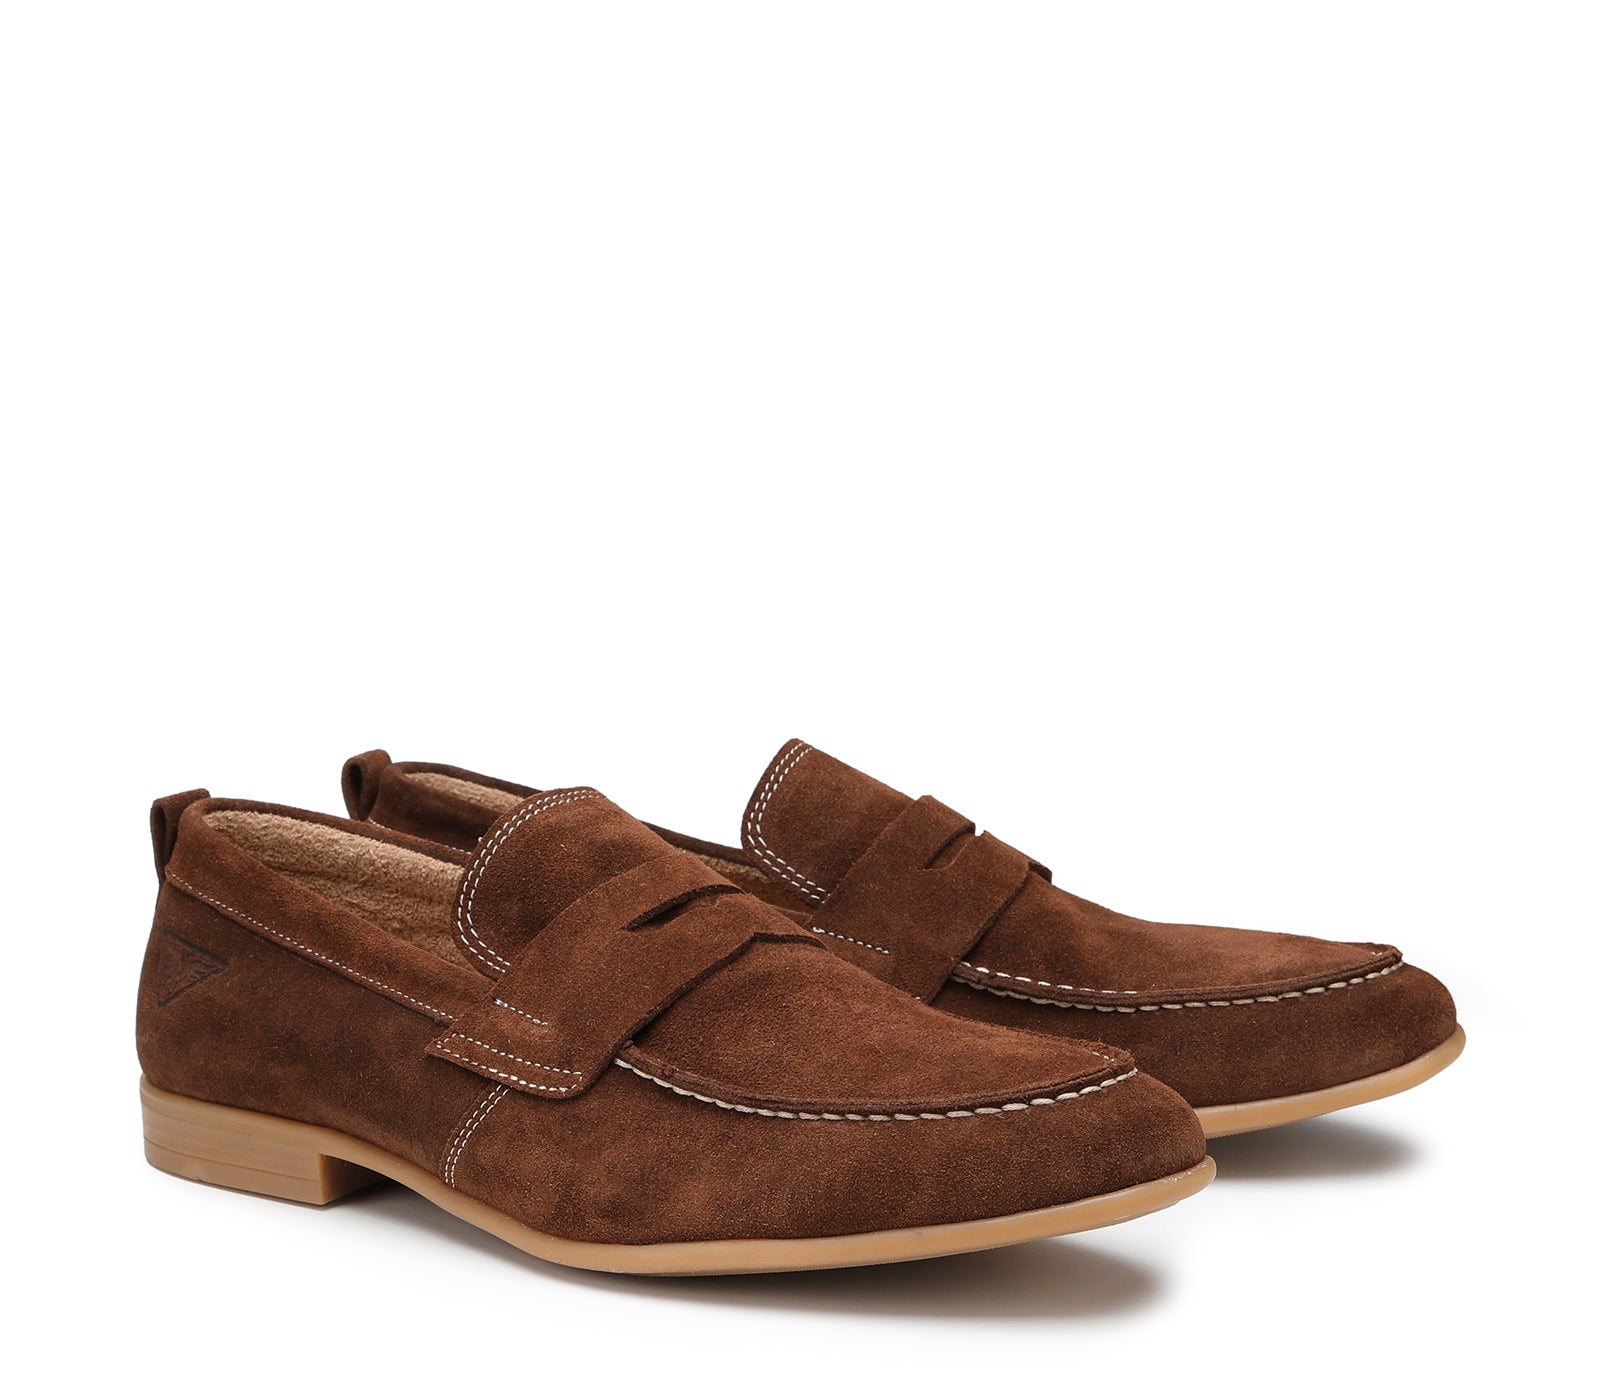 Men's Moccasins in Soft Brown Suede with Rubber Sole 